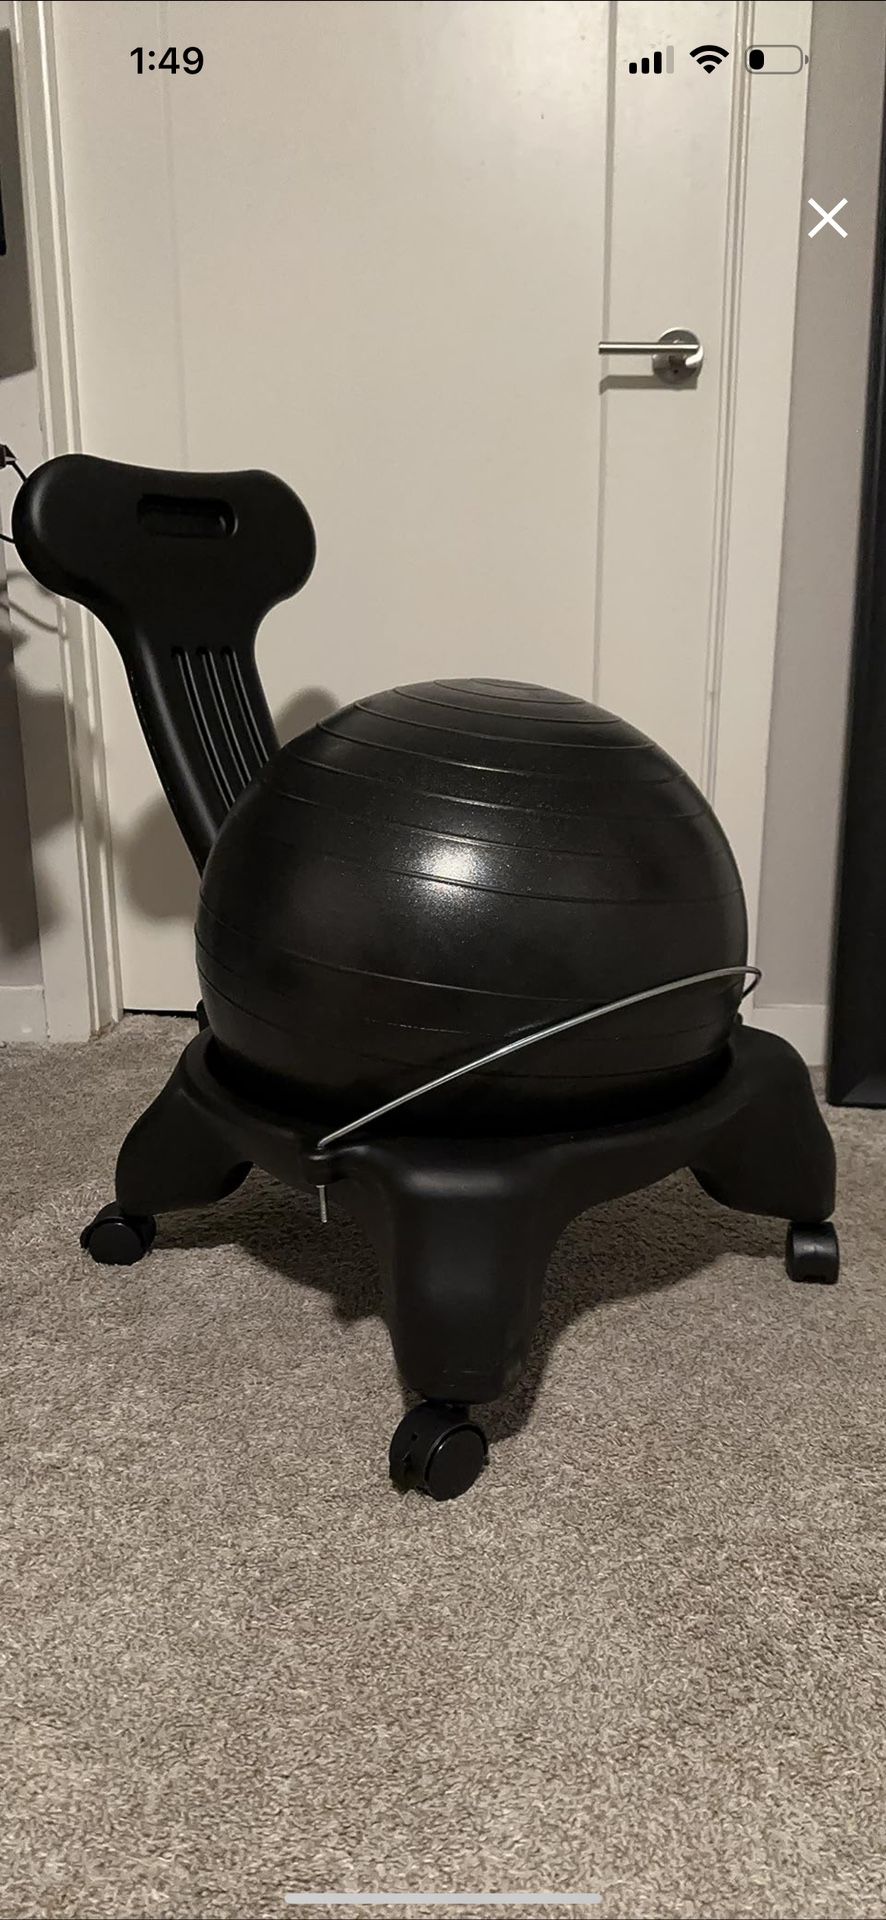 Balance Ball Desk Chair – Exercise Stability Yoga Ball Ergonomic Chair for Home and Office